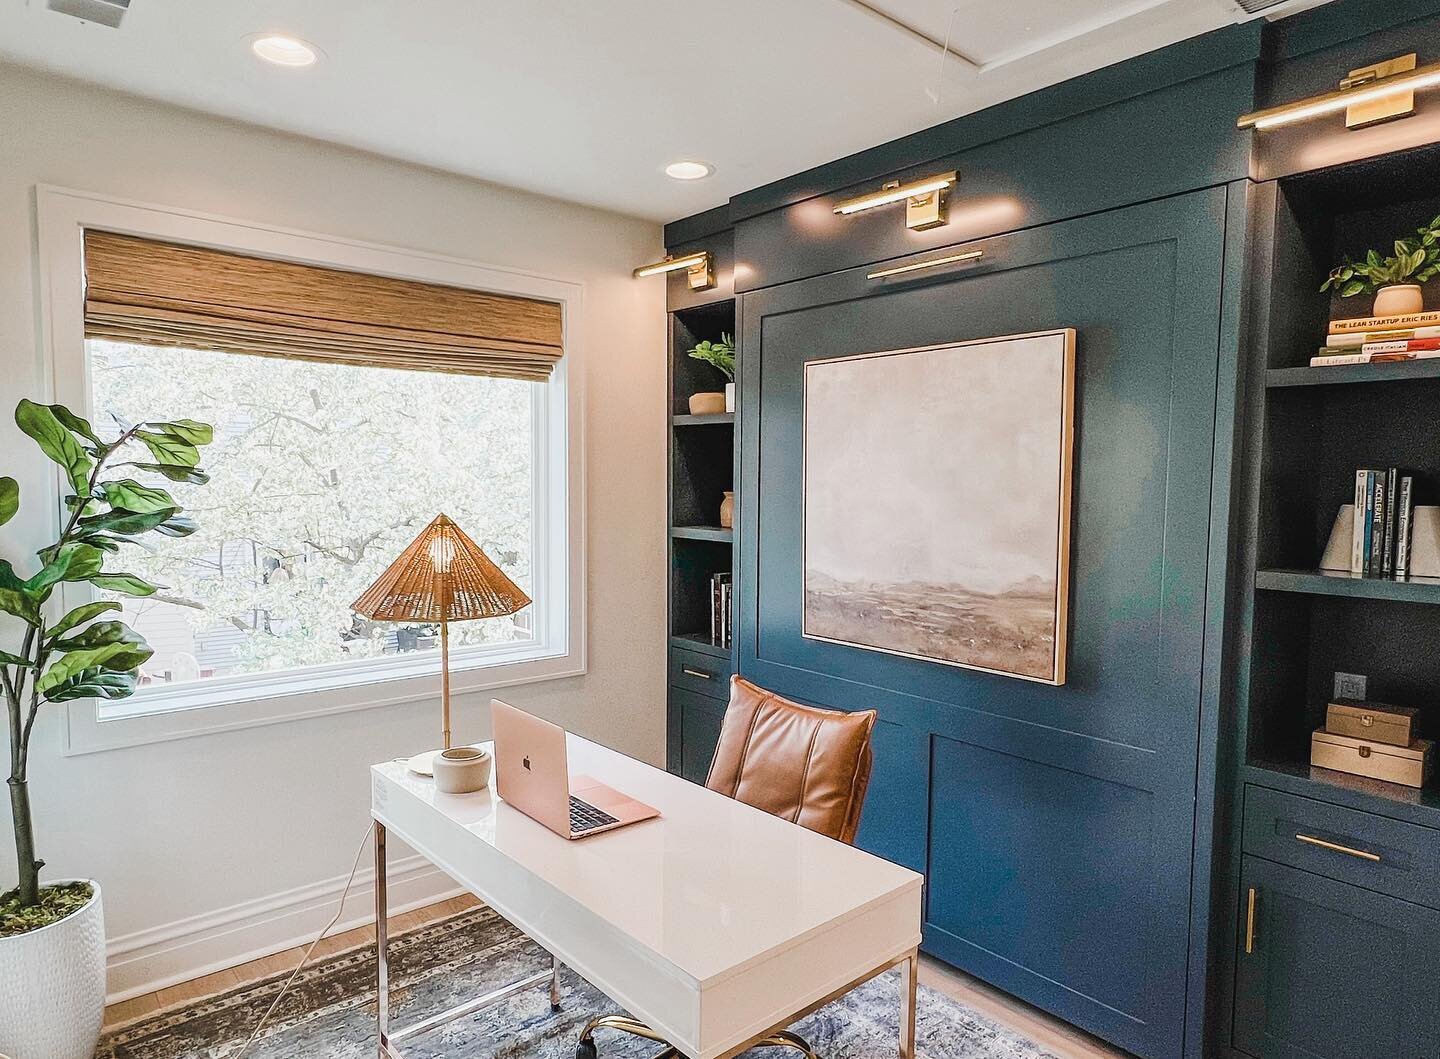 One of the most common design requests I get is for a home office that can also function as a guest room. I love that this custom Murphy bed takes up minimal space and also provides a beautiful pop of color (Sea Serpent by SW). The sconces and art ma